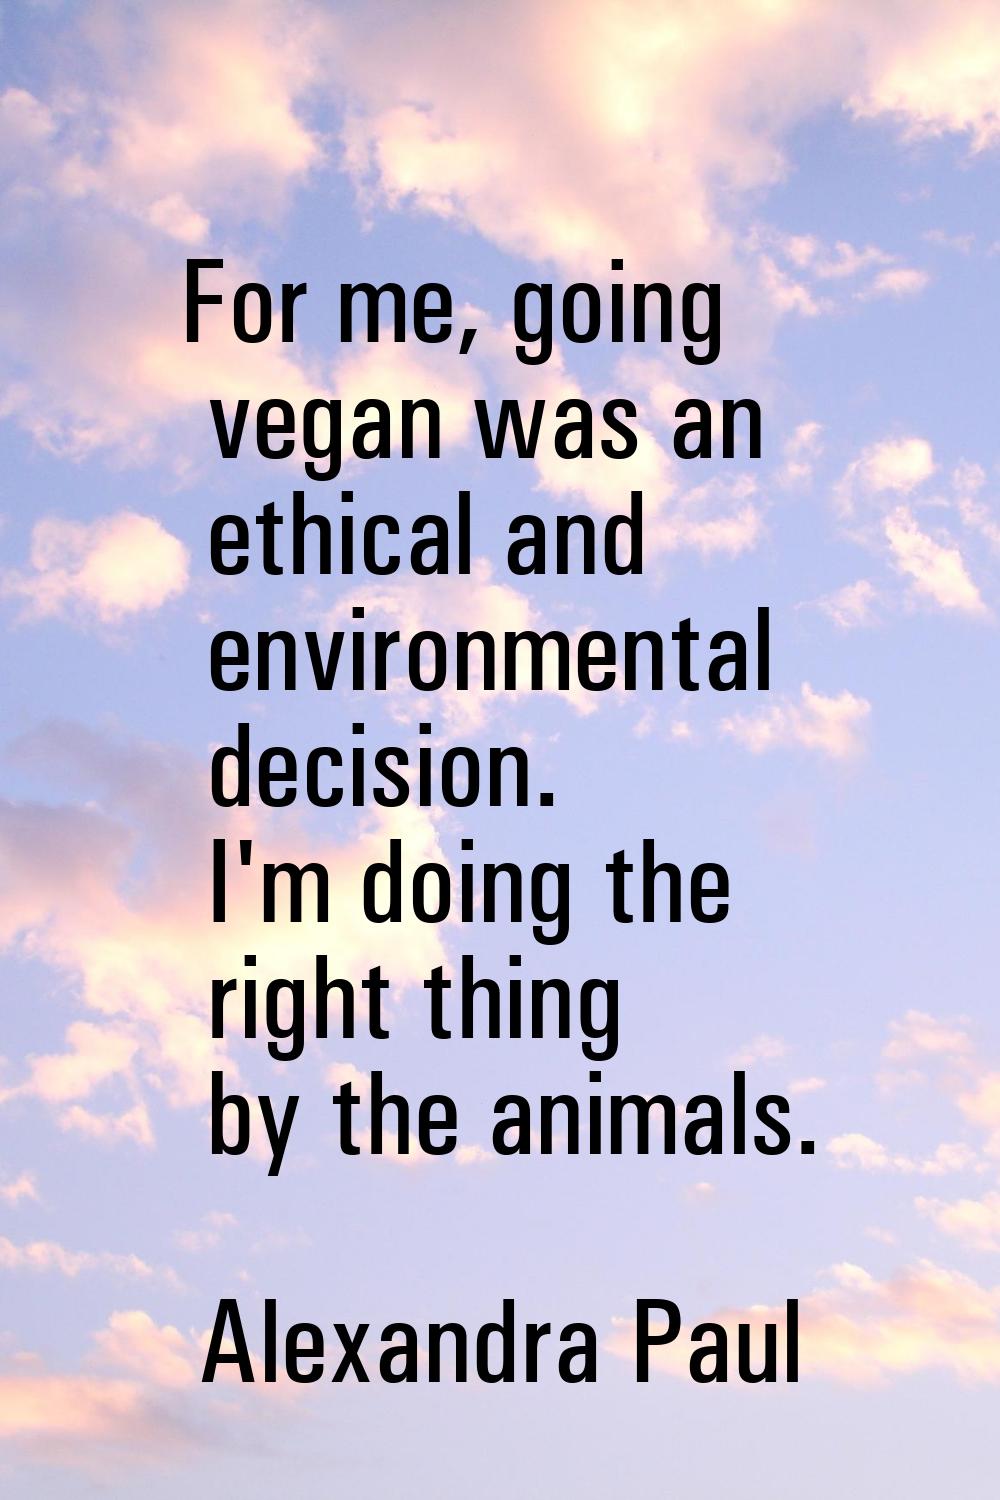 For me, going vegan was an ethical and environmental decision. I'm doing the right thing by the ani